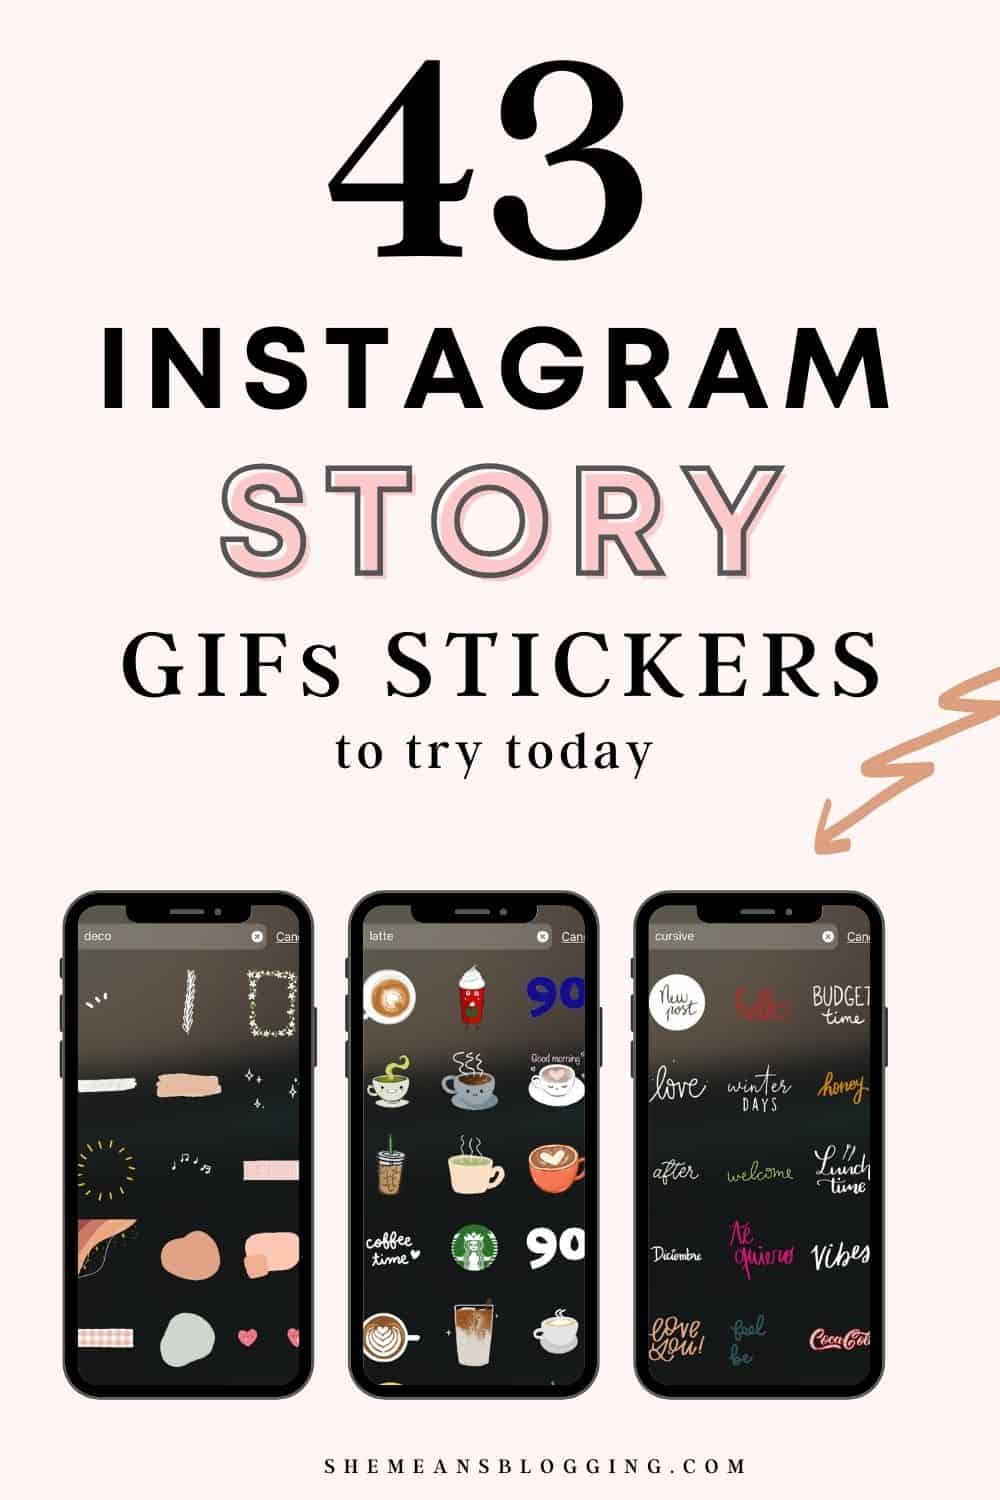 Instagram Story GIFs stickers Ideas. Here are creative best instagram gifs stickers ideas for making unique stories on Instagram. Create engaging instagram stories using cute instagram story gifs stickers. 